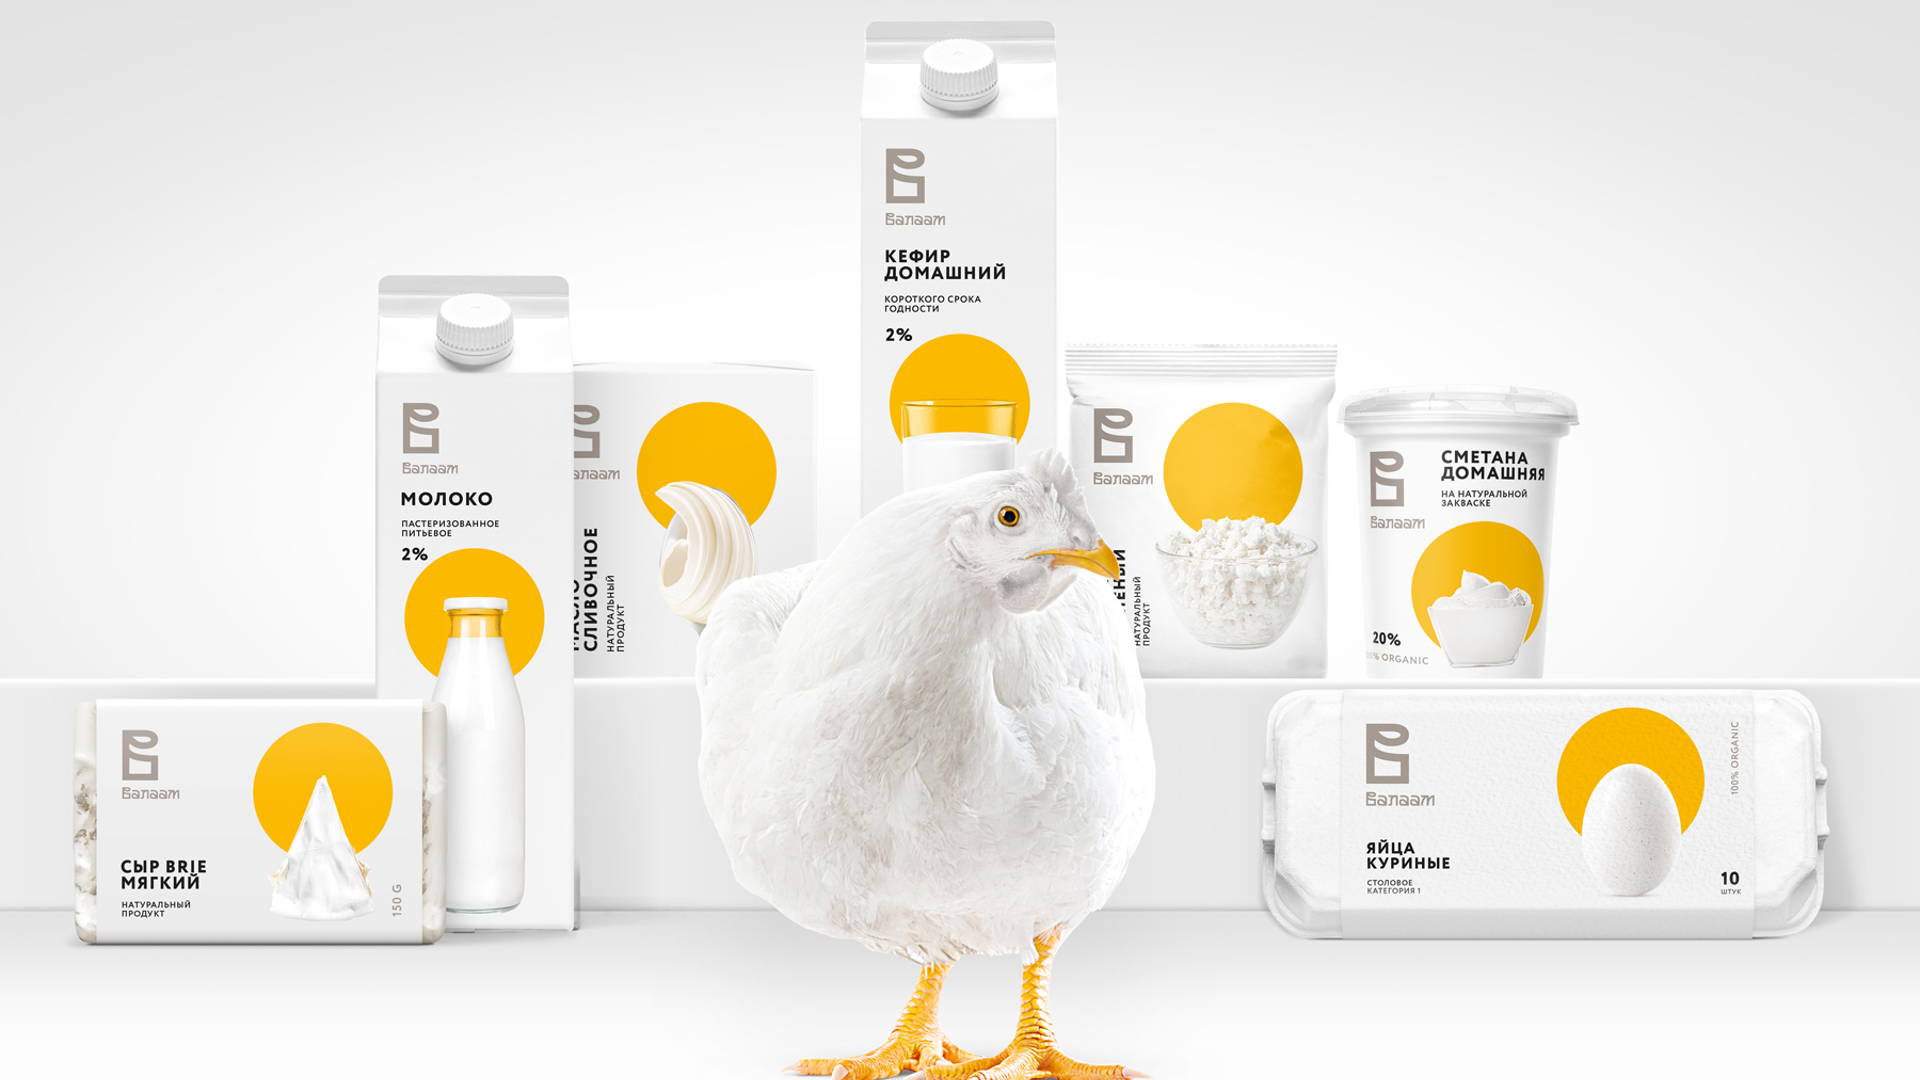 Featured image for The Packaging For These Dairy Products Is Simple Yet Effective